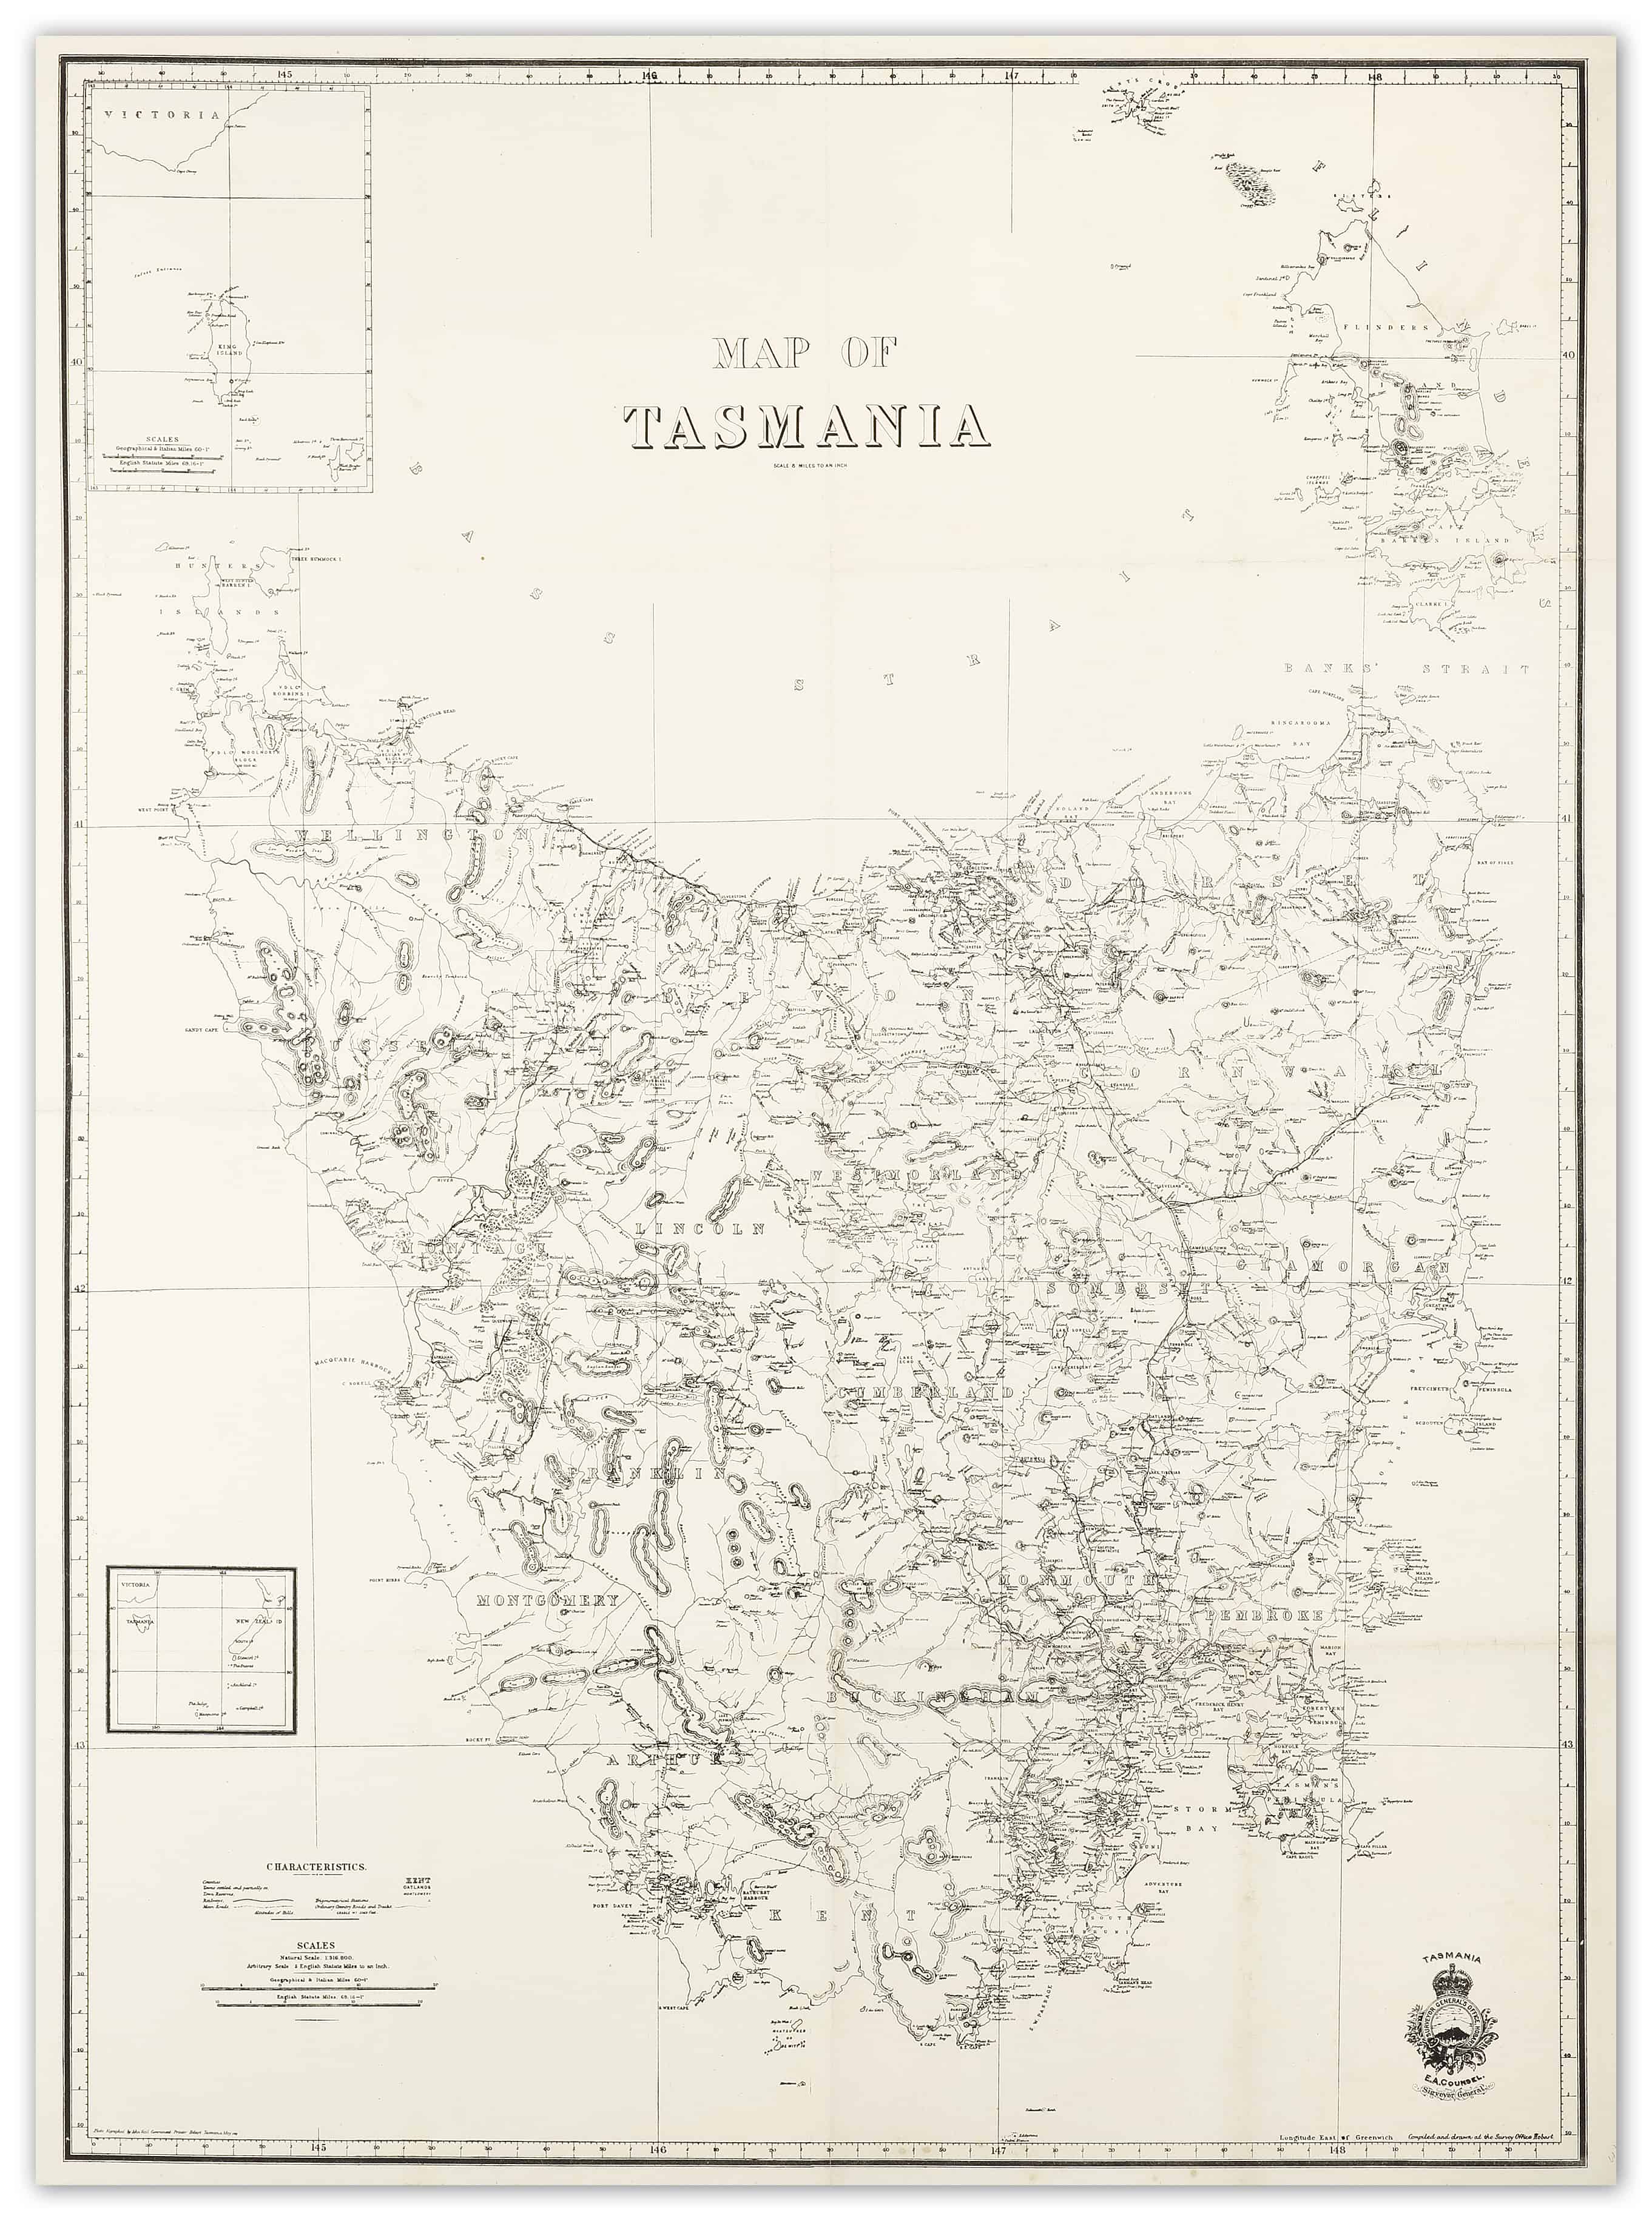 Map of Tasmania - Antique Map from 1911